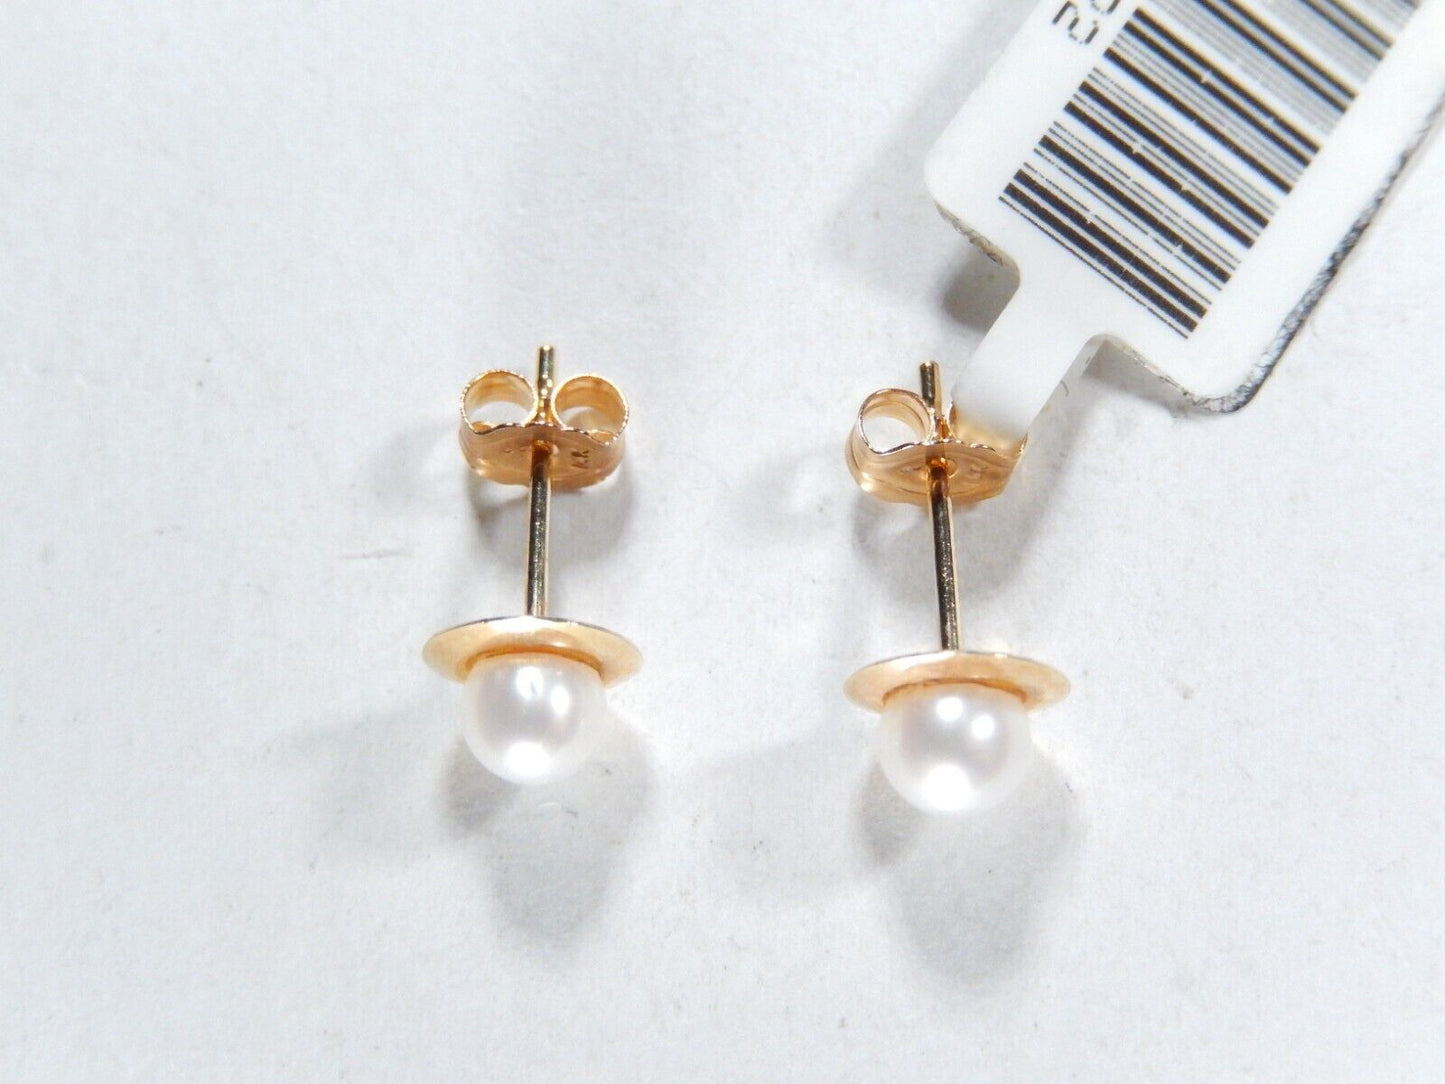 *VINTAGE*  14K Yellow Gold 4mm Round Cultured Pearl Stud Earrings